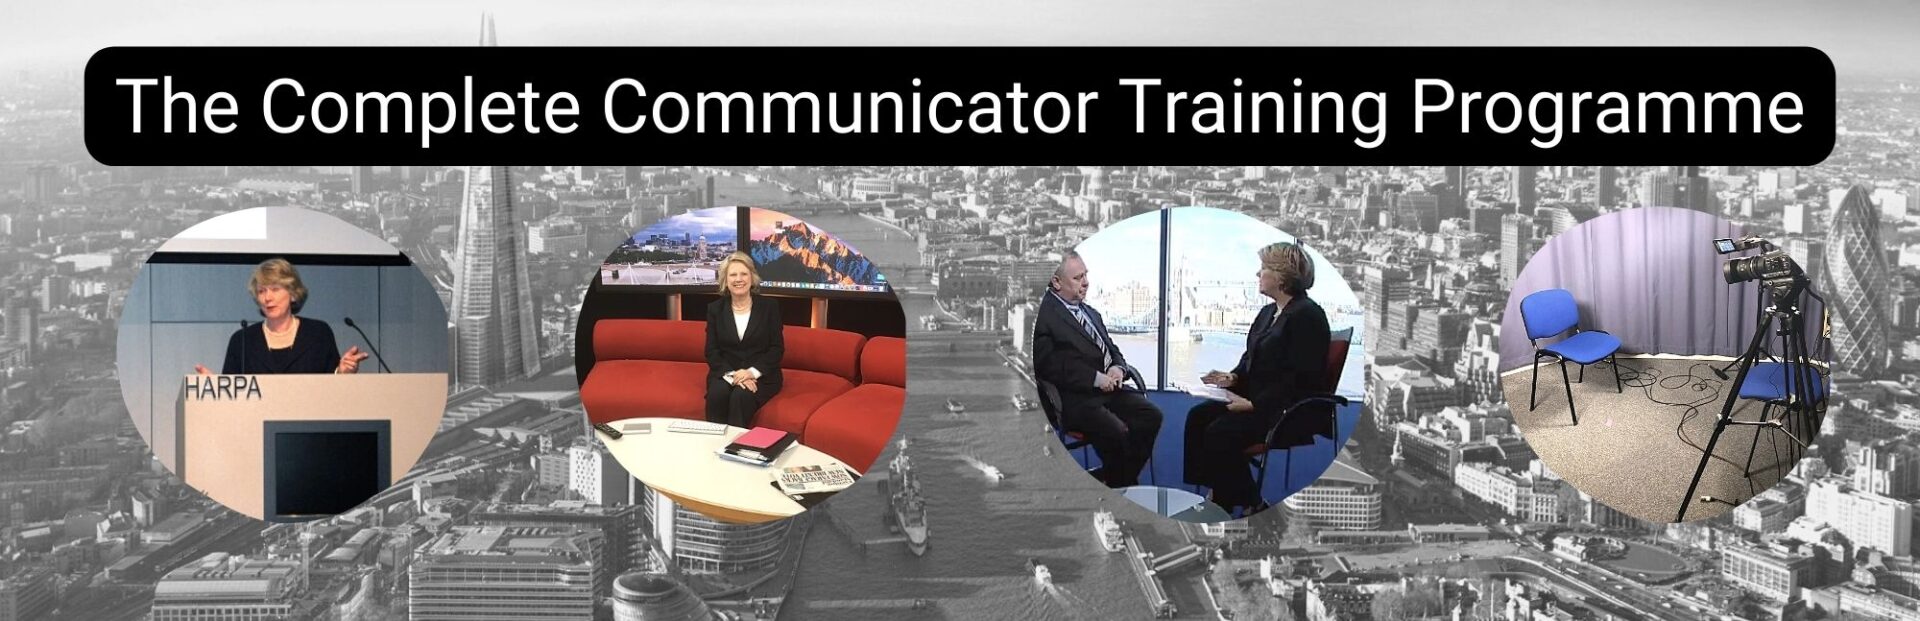 The complete communicator training programme